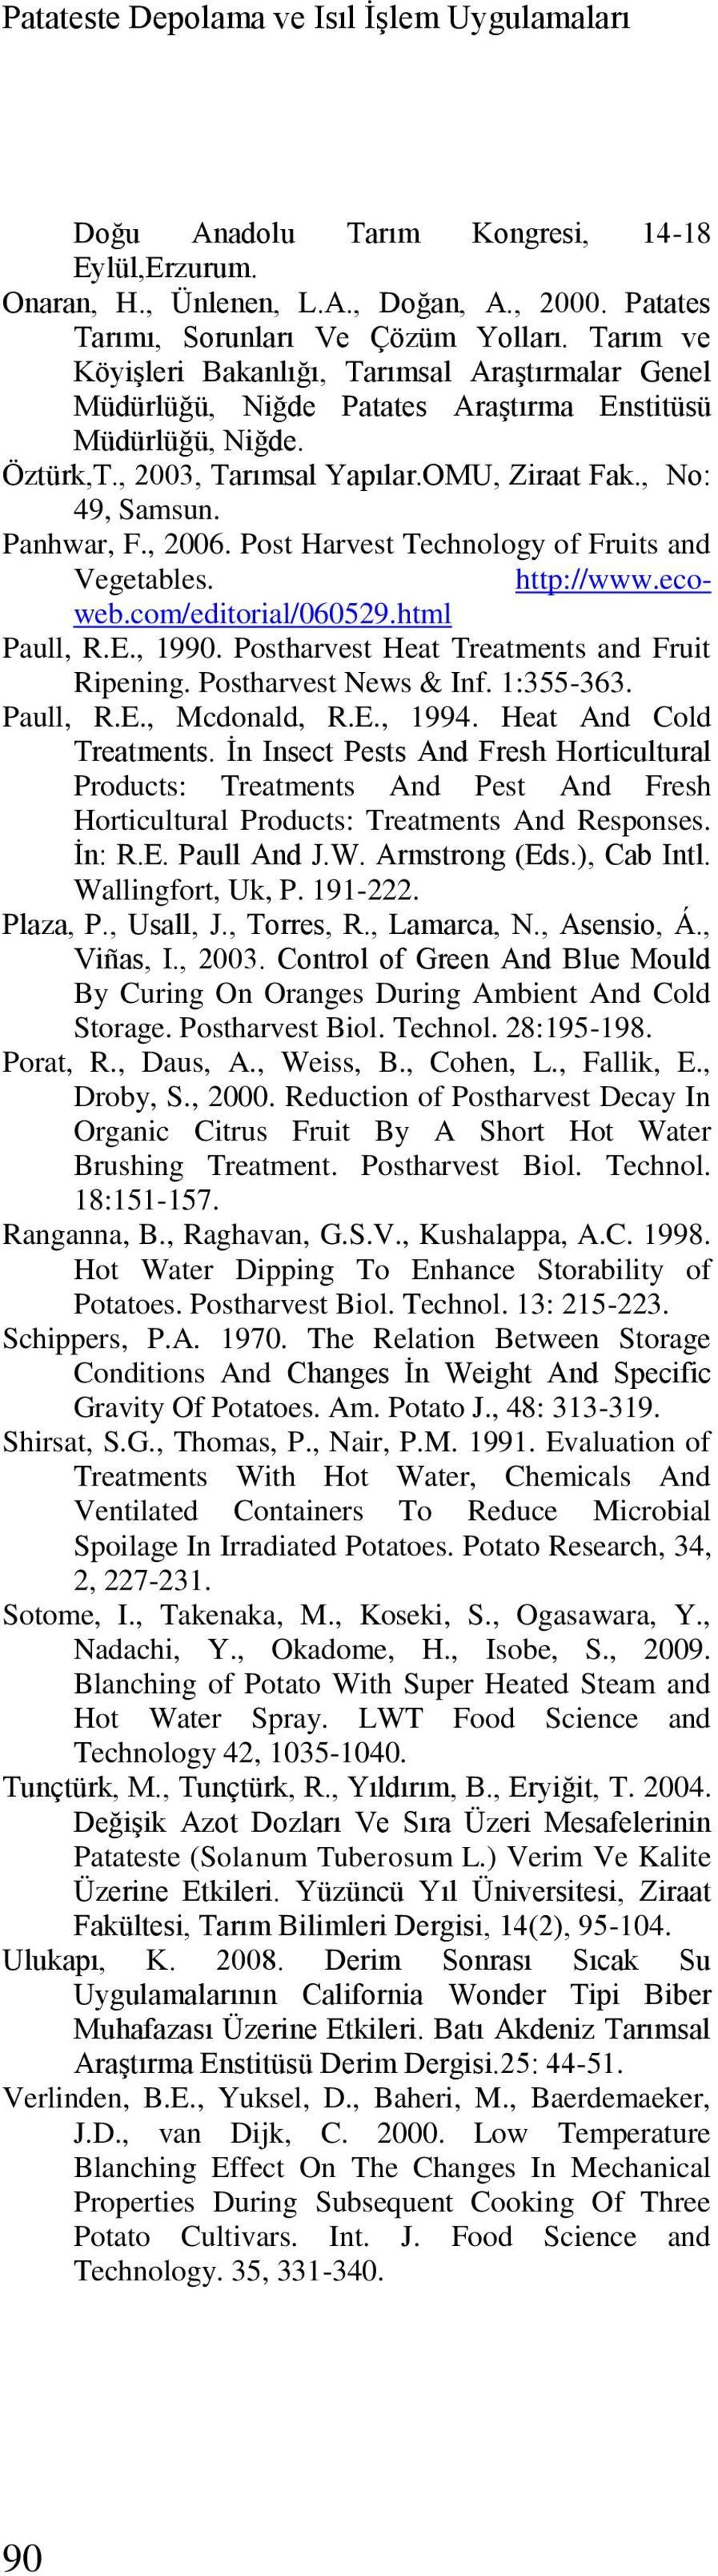 , 2006. Post Harvest Technology of Fruits and Vegetables. http://www.ecoweb.com/editorial/060529.html Paull, R.E., 1990. Postharvest Heat Treatments and Fruit Ripening. Postharvest News & Inf.